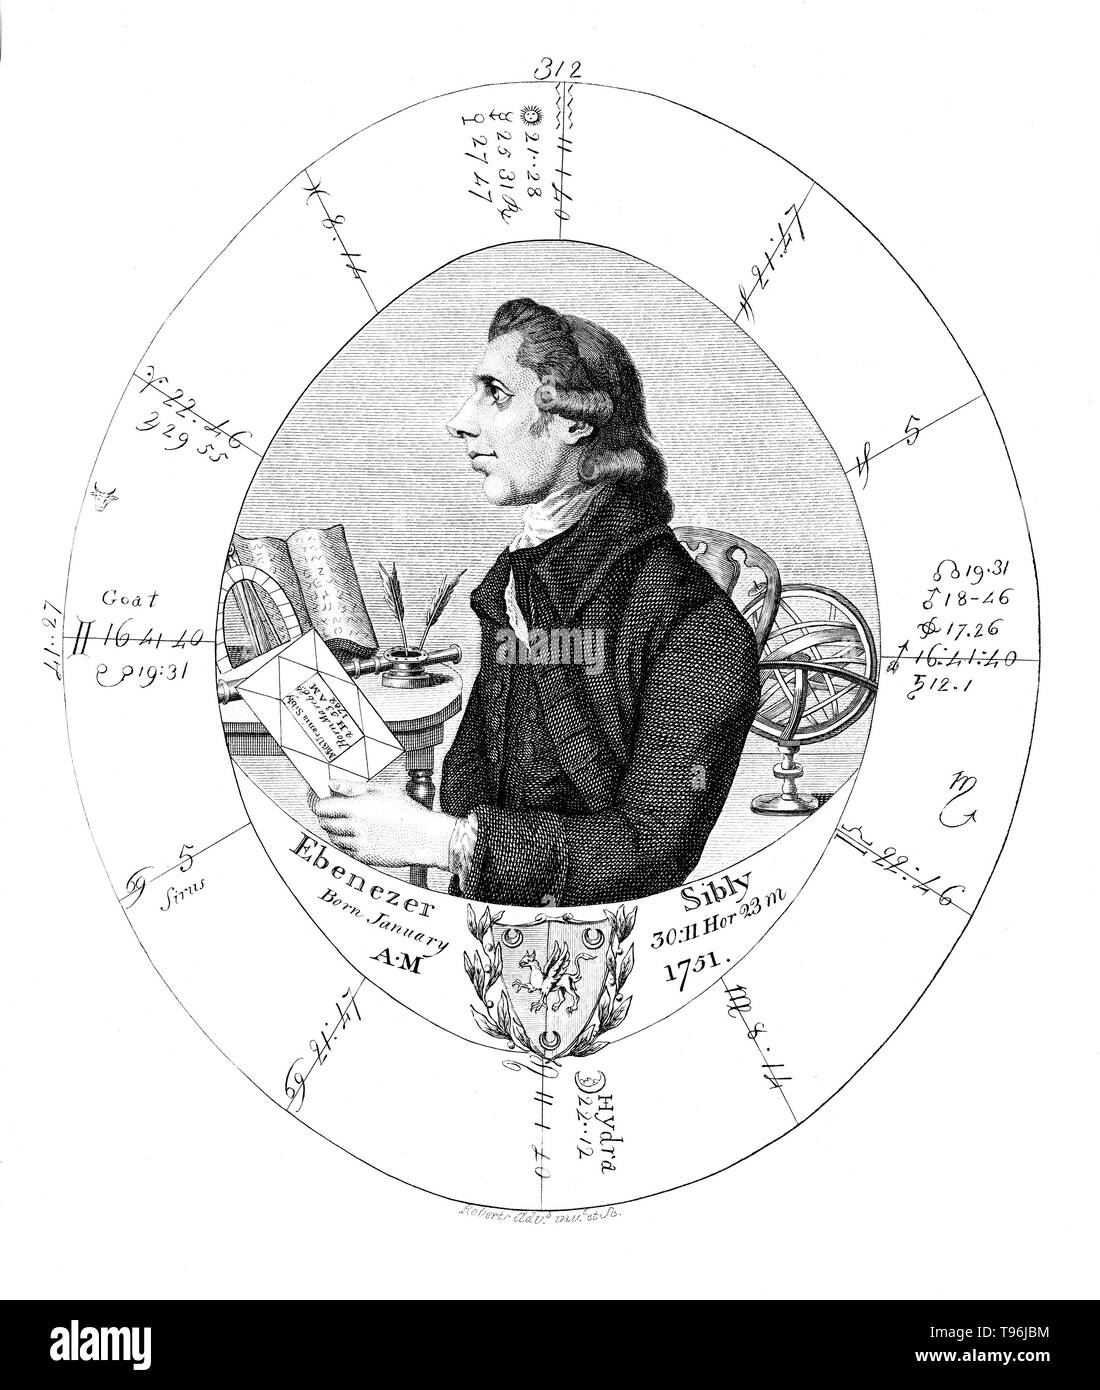 Ebenezer Sibly (1751 - 1799) was an English physician, astrologer and writer on the occult. As a student of medicine, he became interested in the theories on animal magnetism of Anton Mesmer, joining Mesmer's Harmonic Philosophical School. As an astrologer, Ebenezer is said to have used the Placidian system of houses; as a student of alchemy, he translated Bernard of Treviso (the fountain allegory). Stock Photo